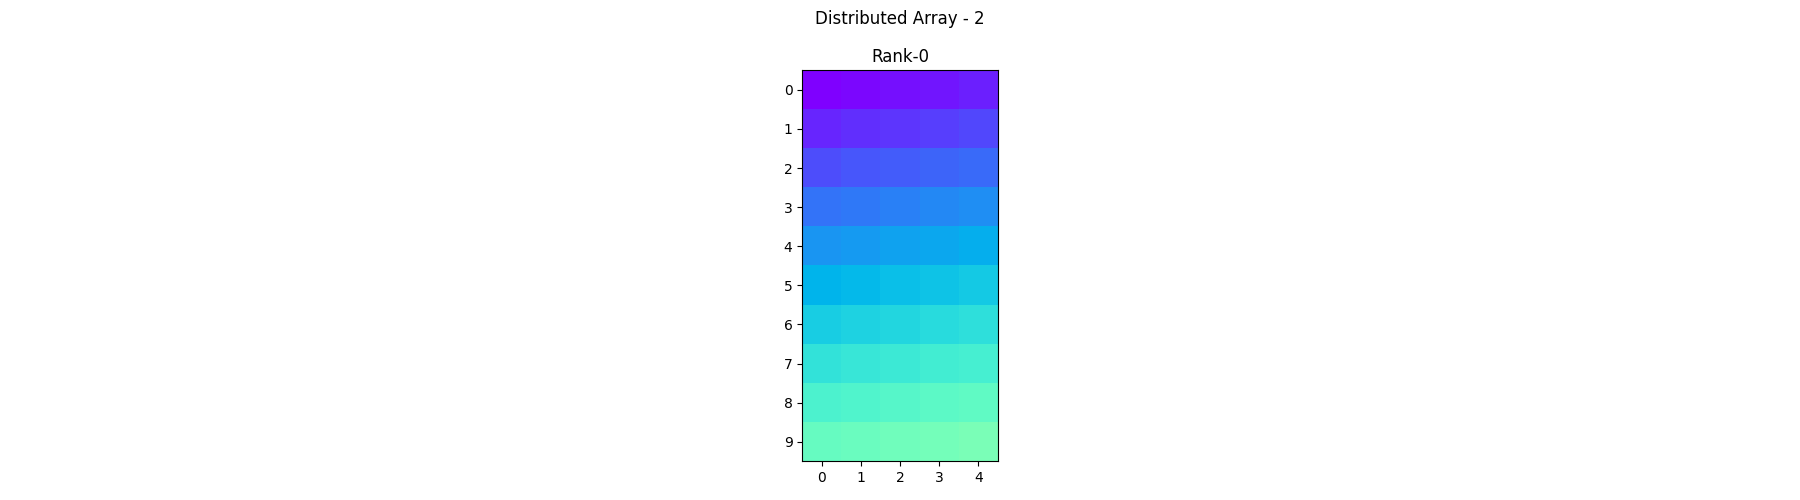 Distributed Array - 2, Rank-0